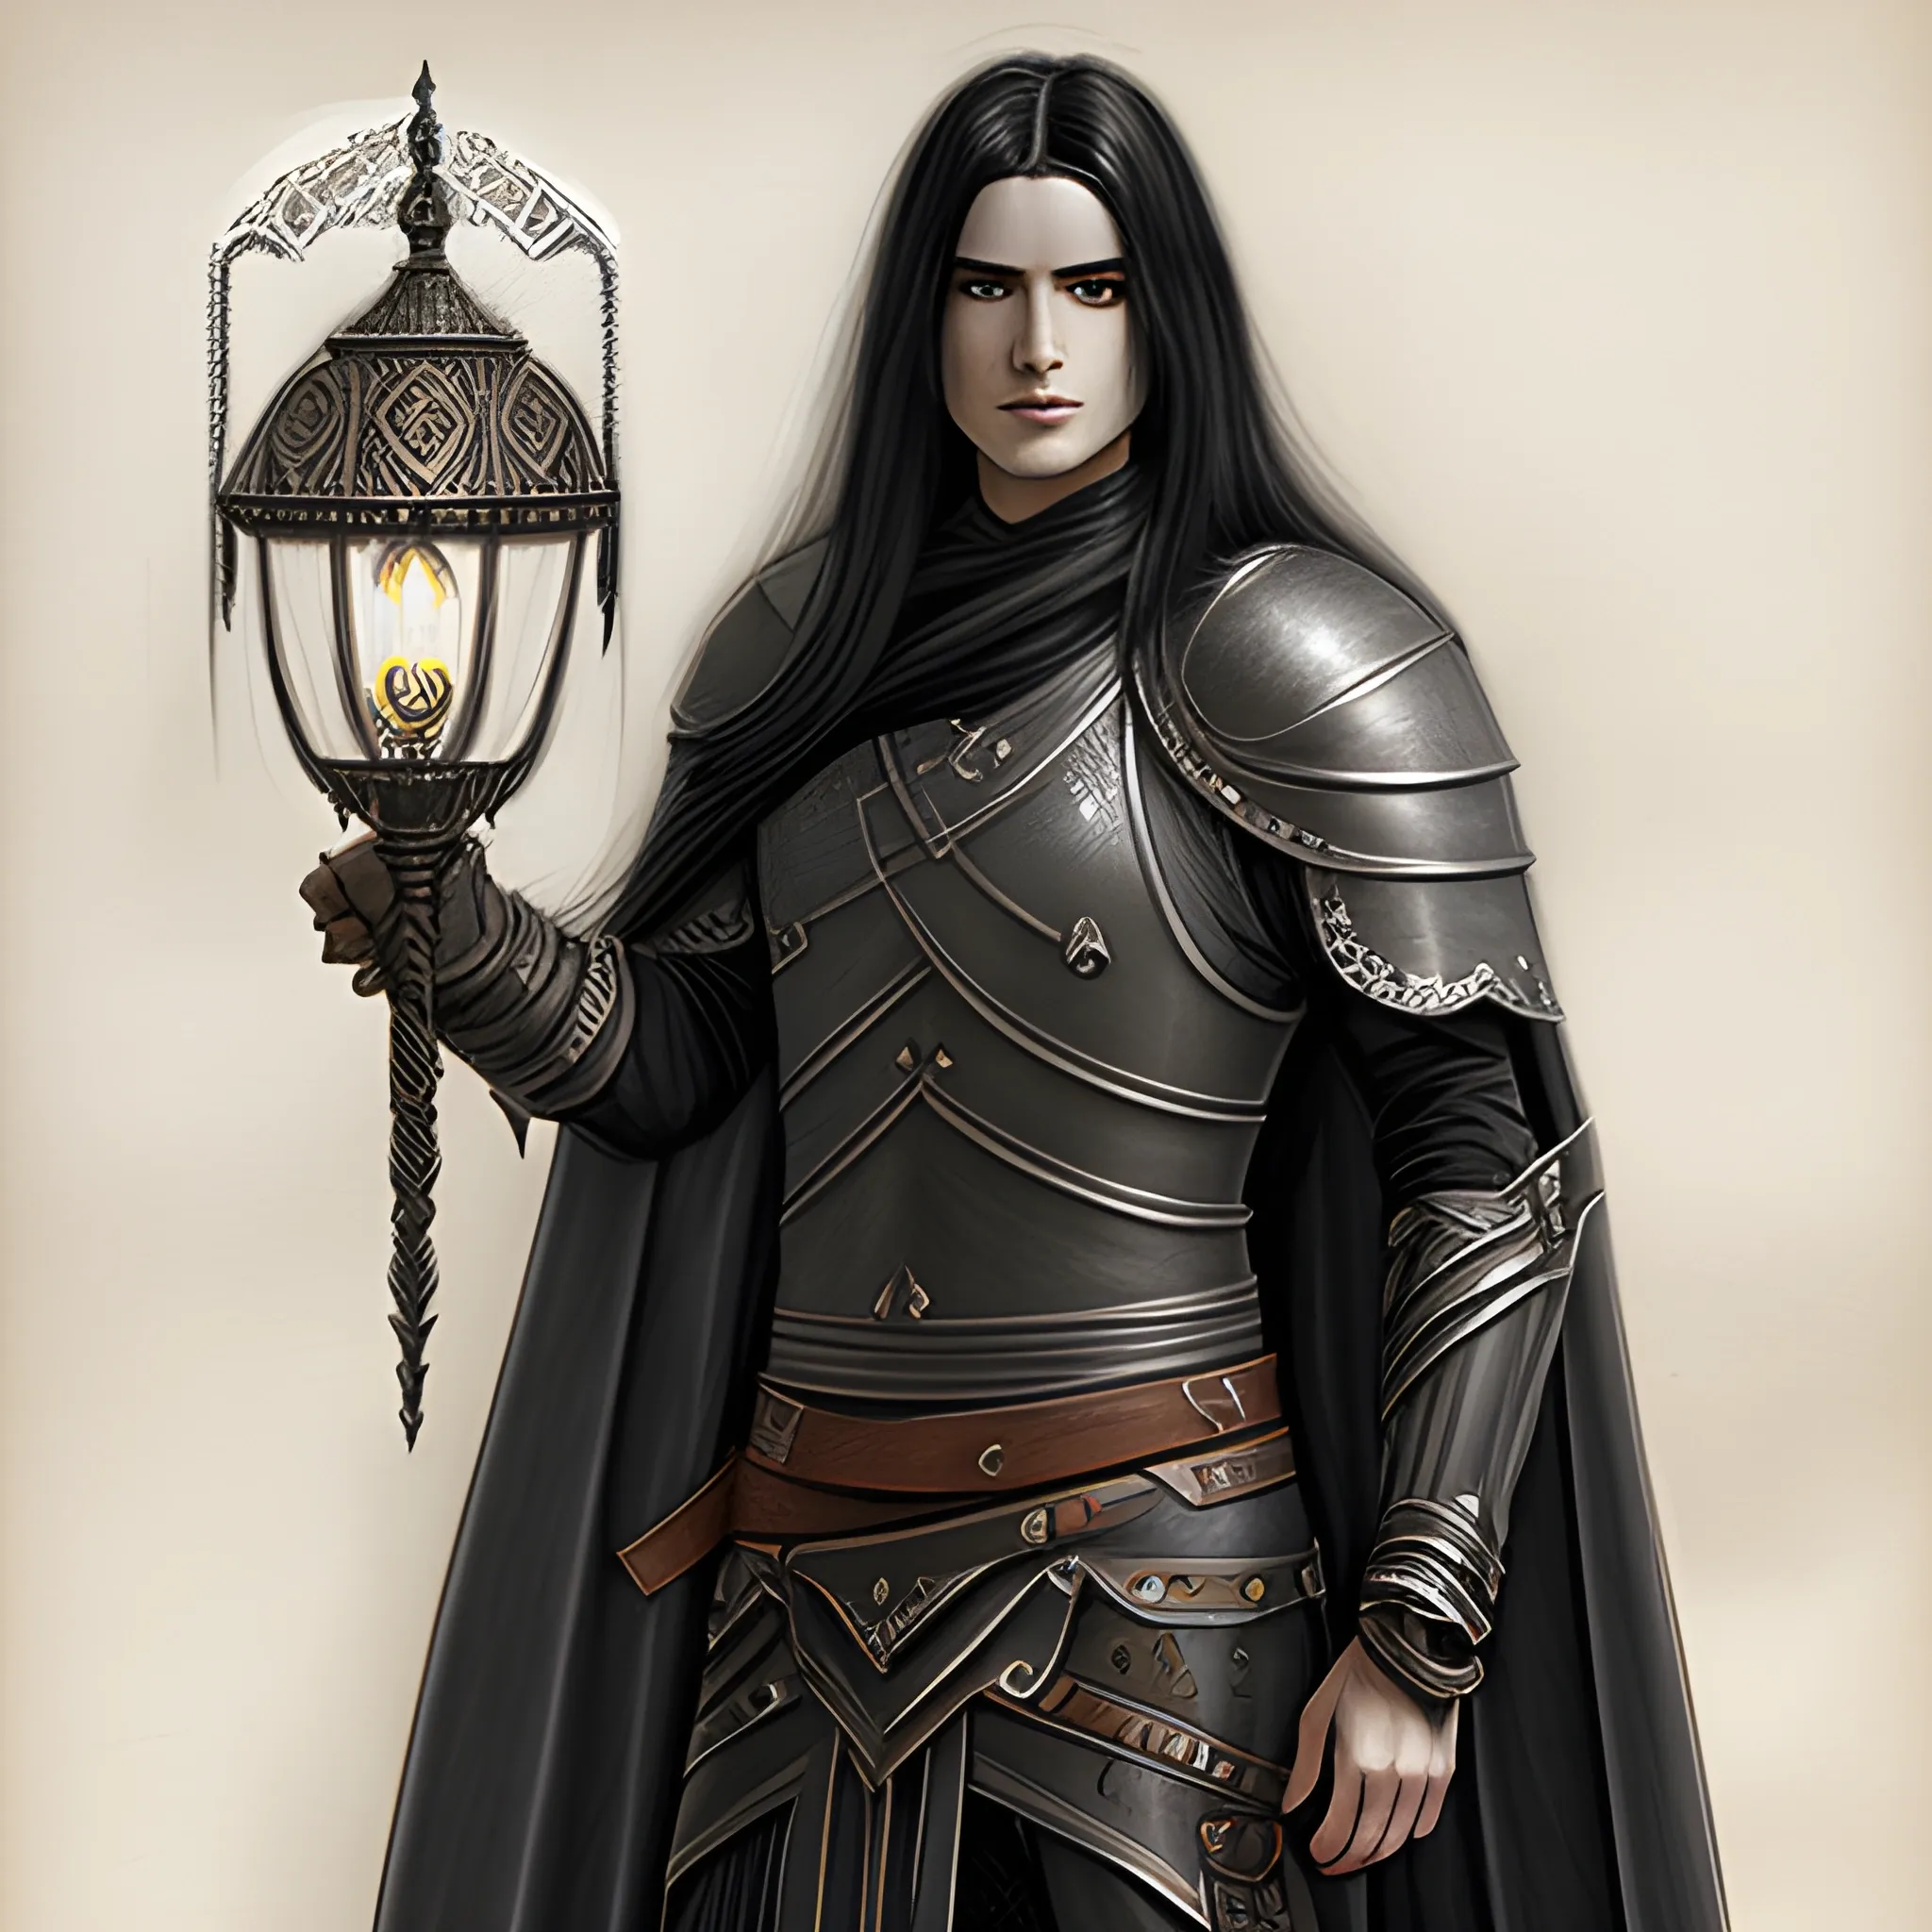 long black haired, male, aasimar, leather armor, cape holding a djinni lamp
, Pencil Sketch